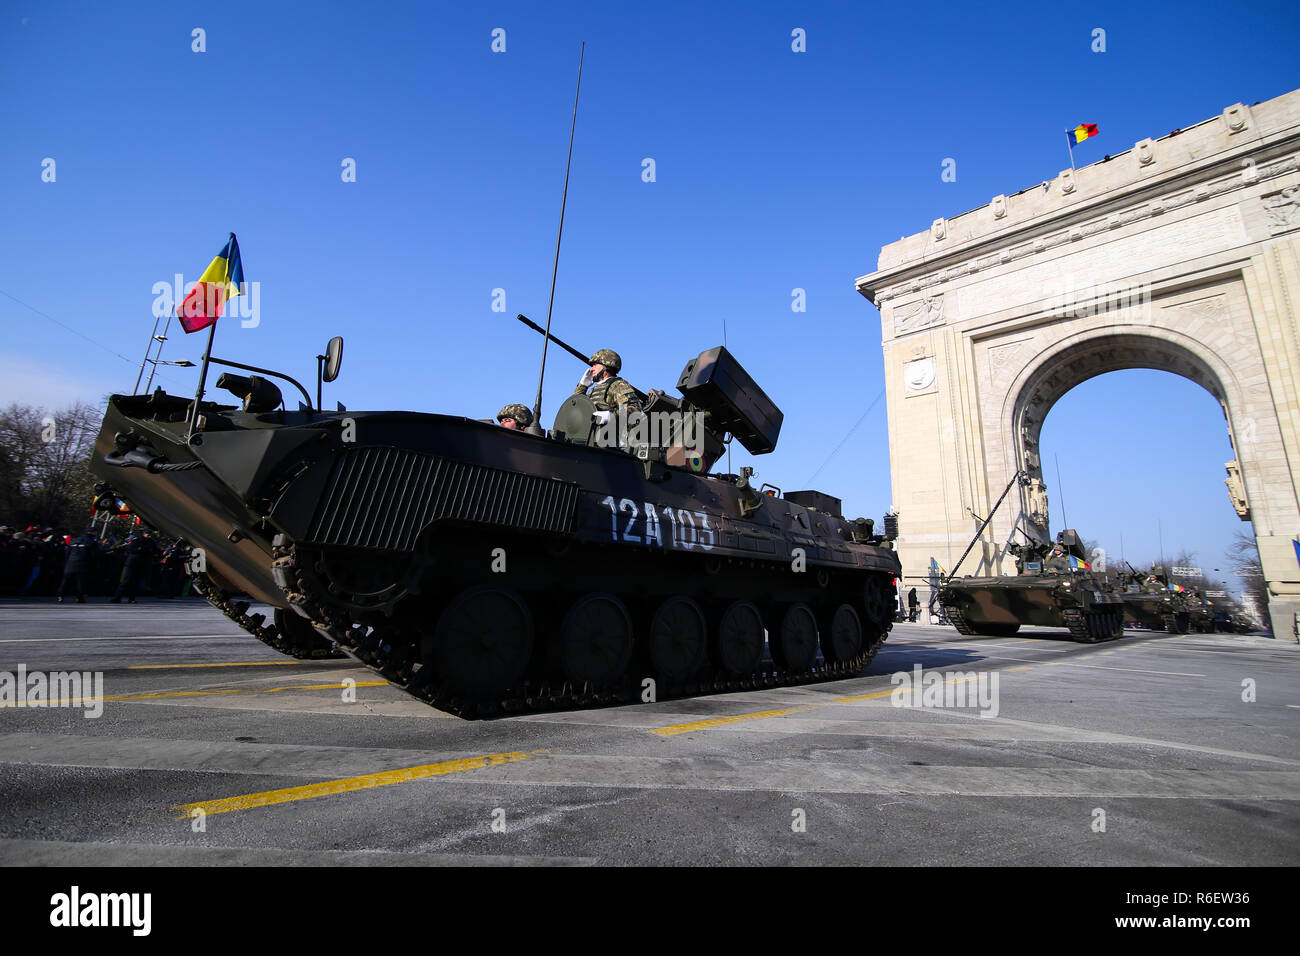 BUCHAREST, ROMANIA - December 1, 2018: MLI 84 M combat armored vehicle at Romanian National Day military parade passes under the Arch of Triumph Stock Photo